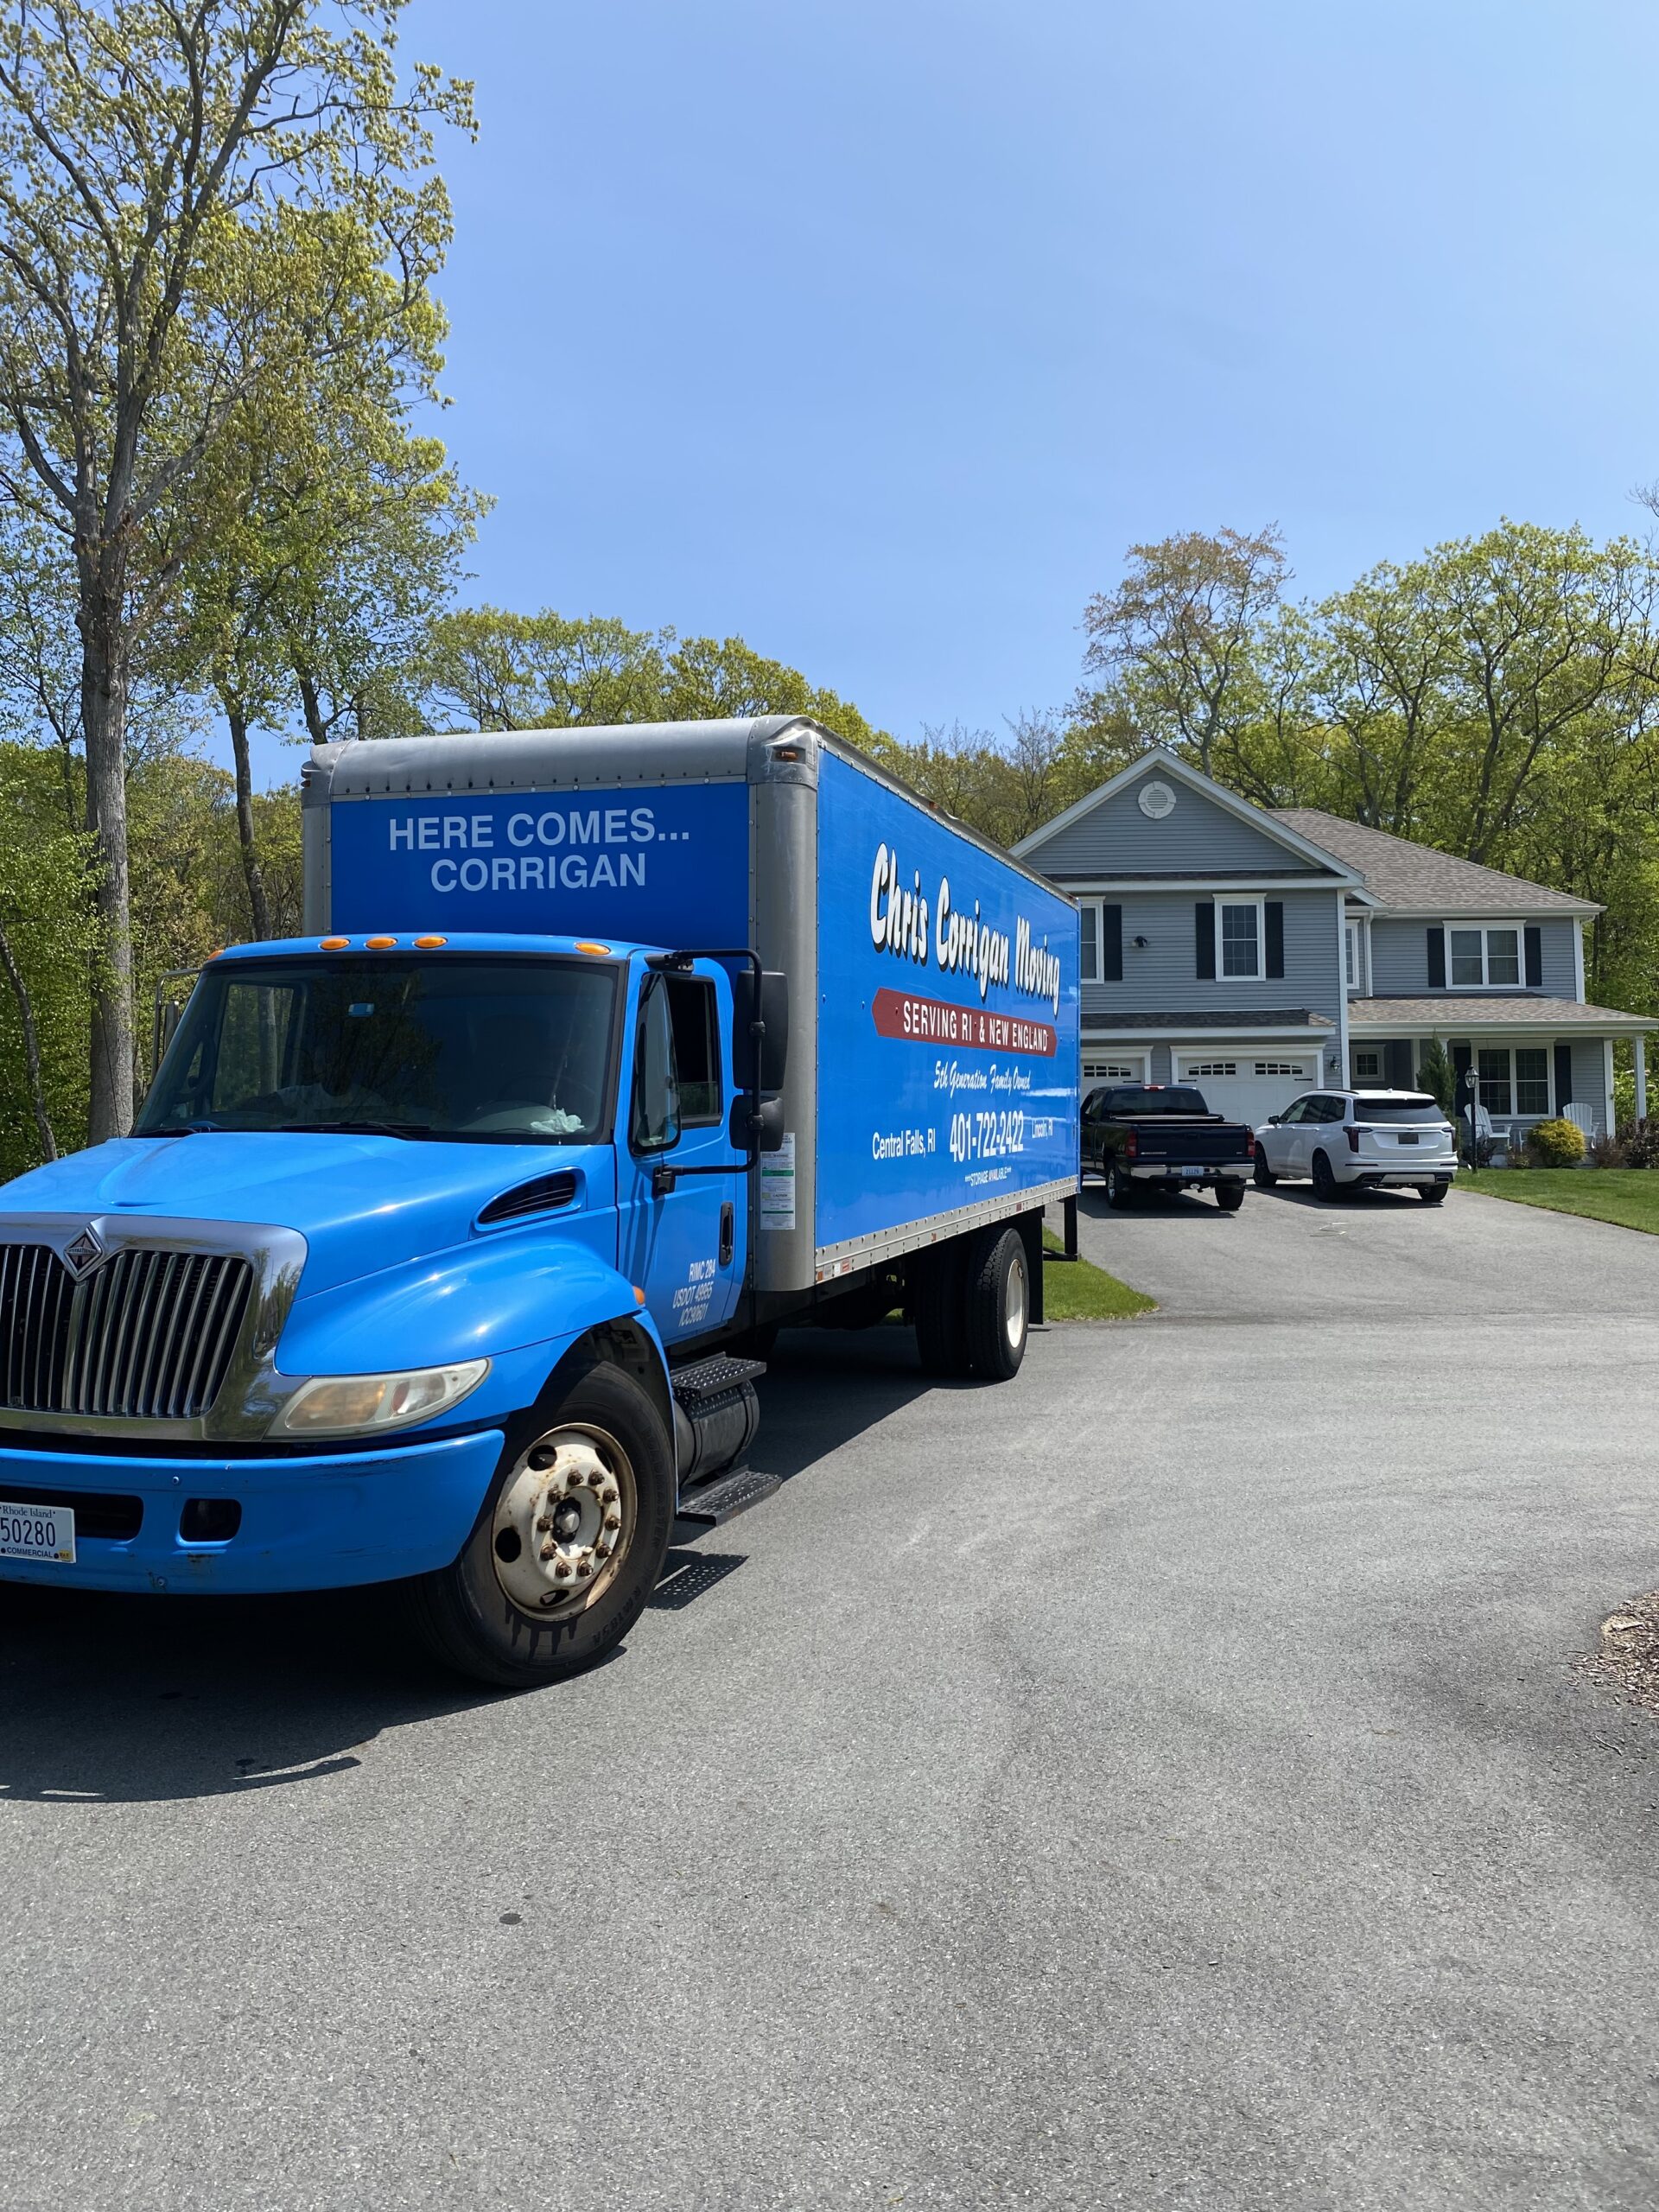 A Moving Company truck parked in front of a house.